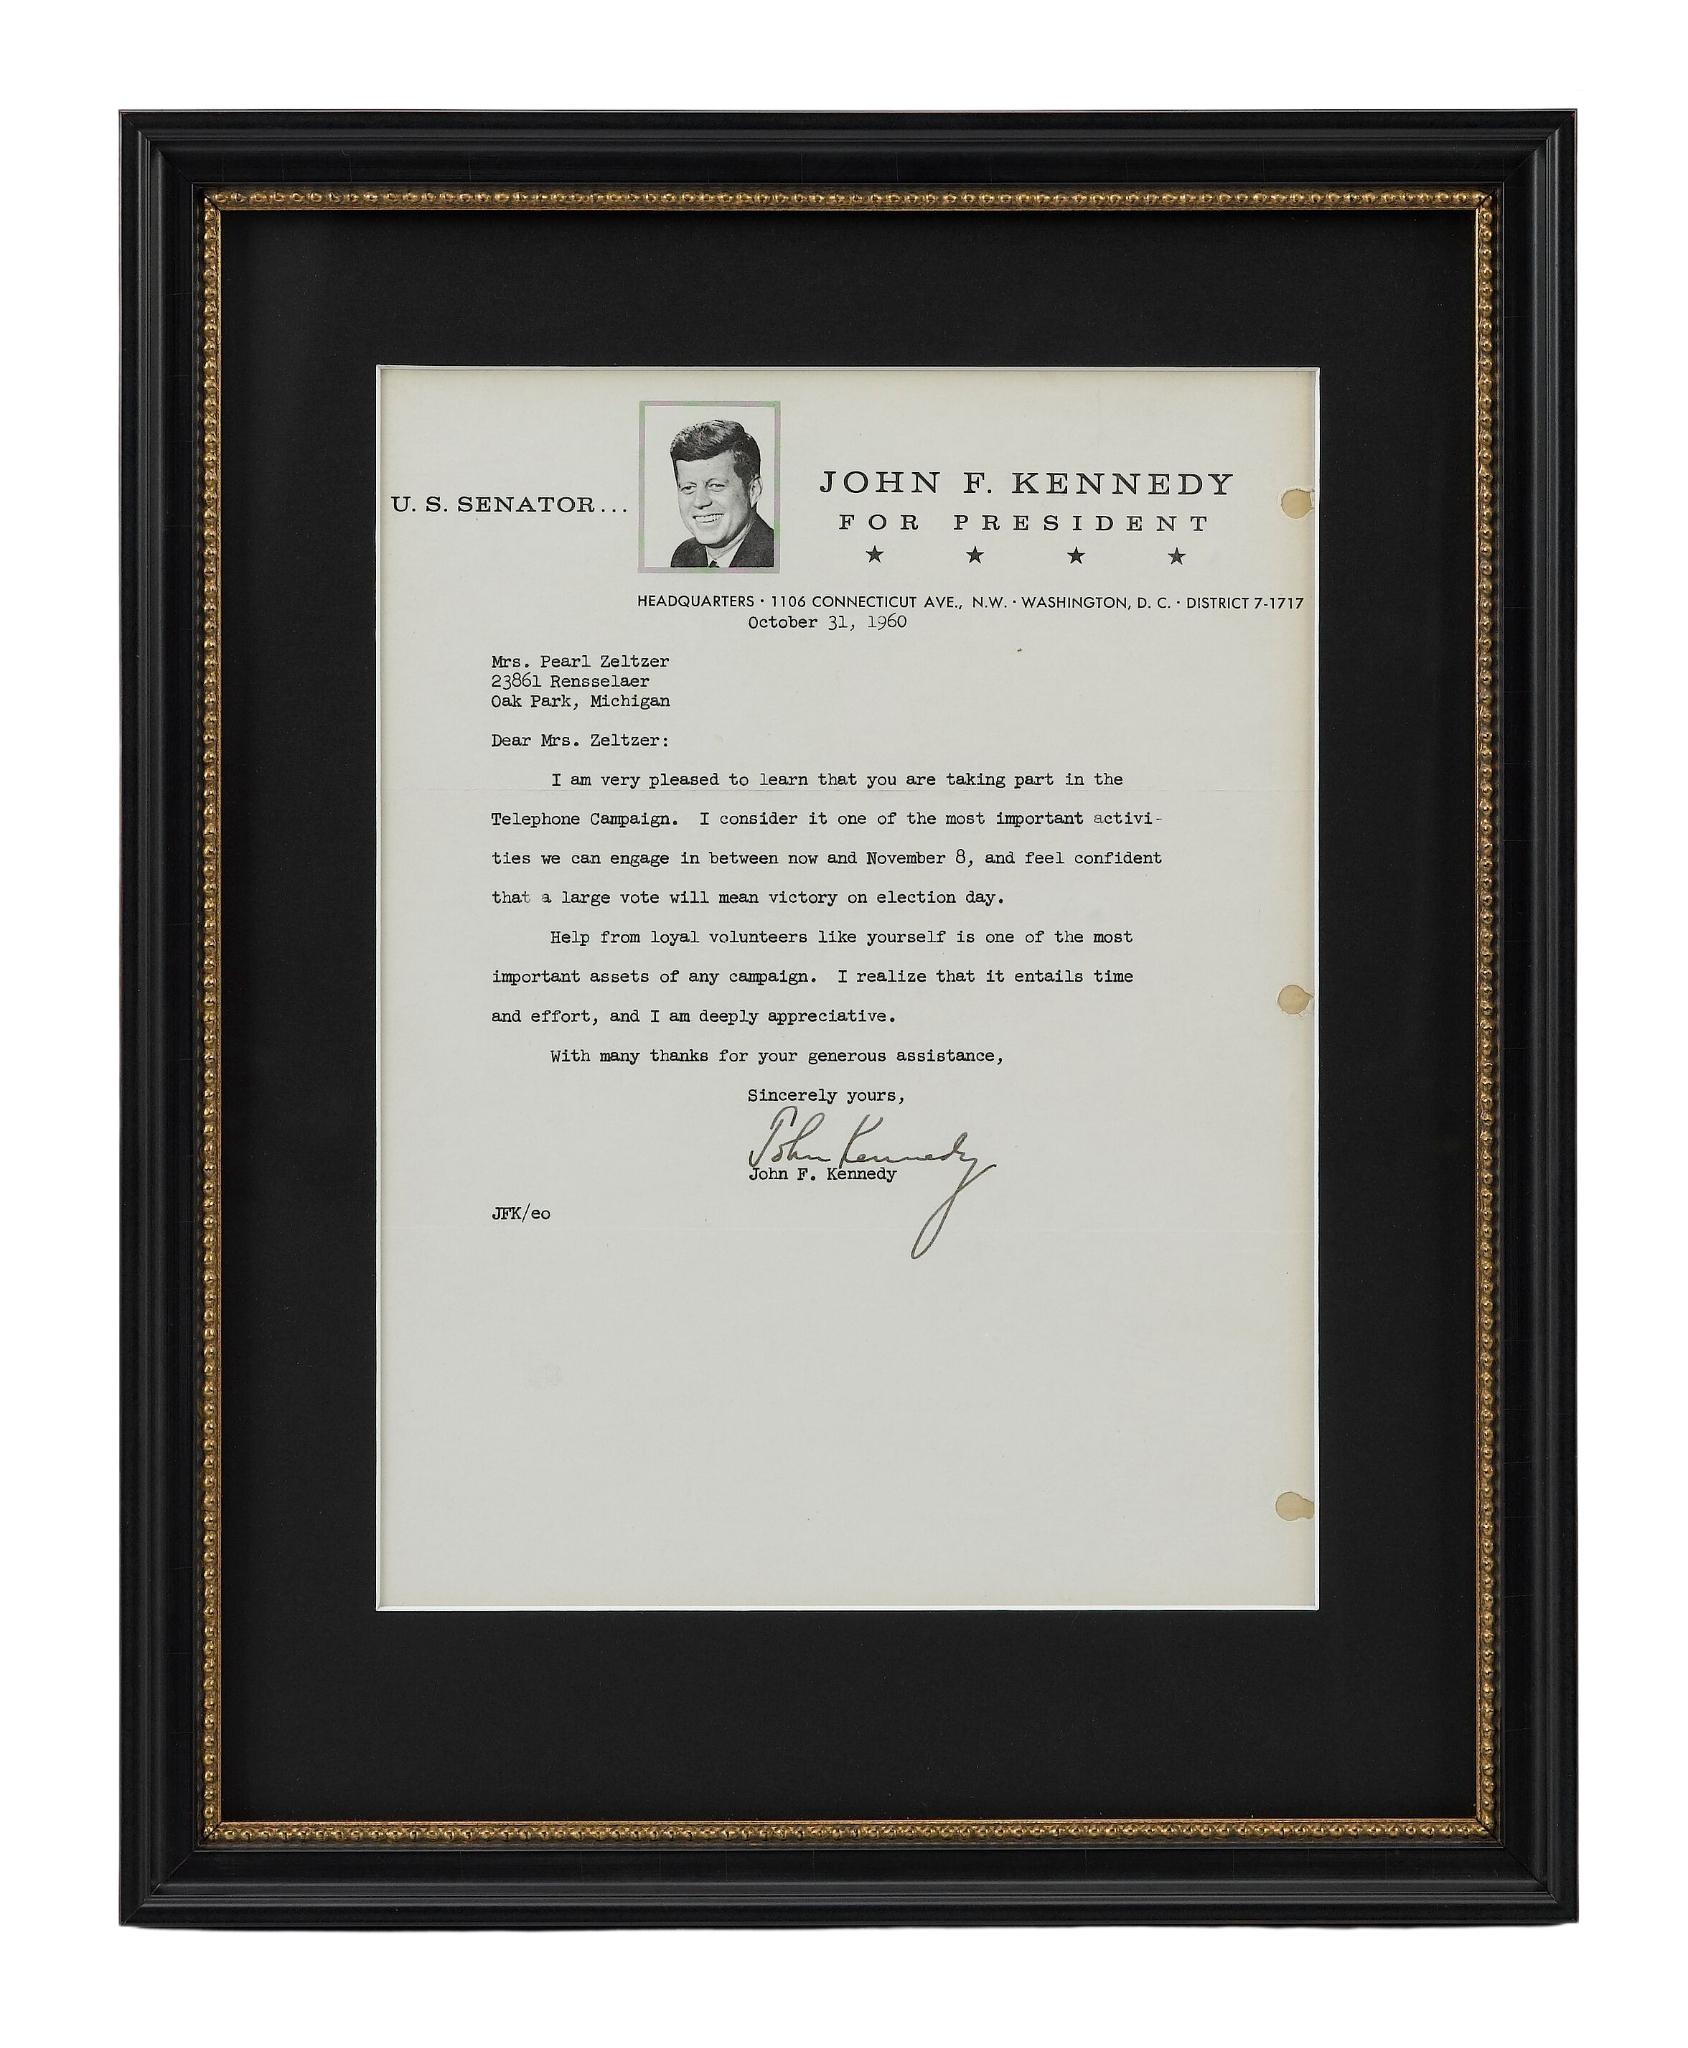 Presented is a typed letter from John F. Kennedy on official stationary from his presidential campaign. The letter is addressed to Mrs. Pearl Zeltzer, a campaign volunteer residing in Oak Park, Michigan. In the letter, written eight days before the